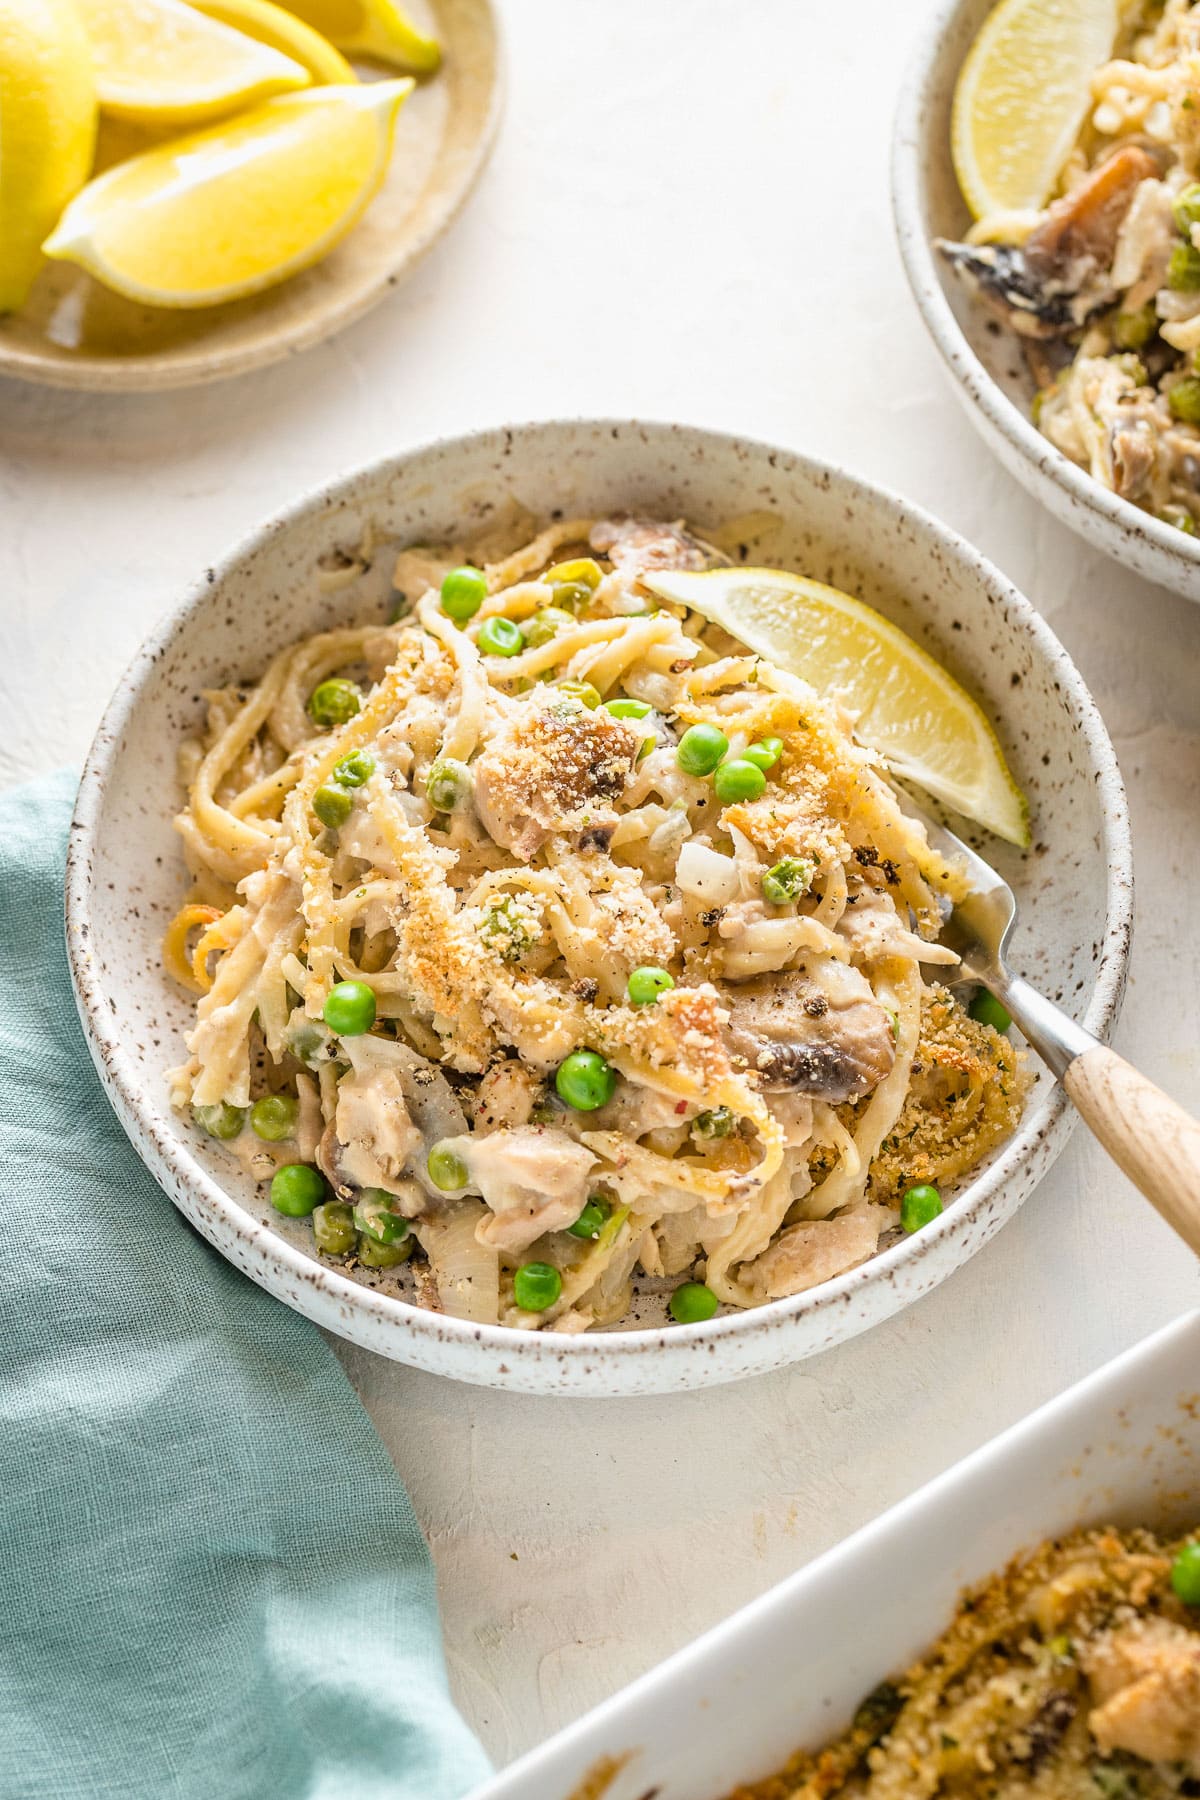 A white serving bowl with tuna tetrazzini, lemon wedges, and peas on a neutral table with a blue napkin.